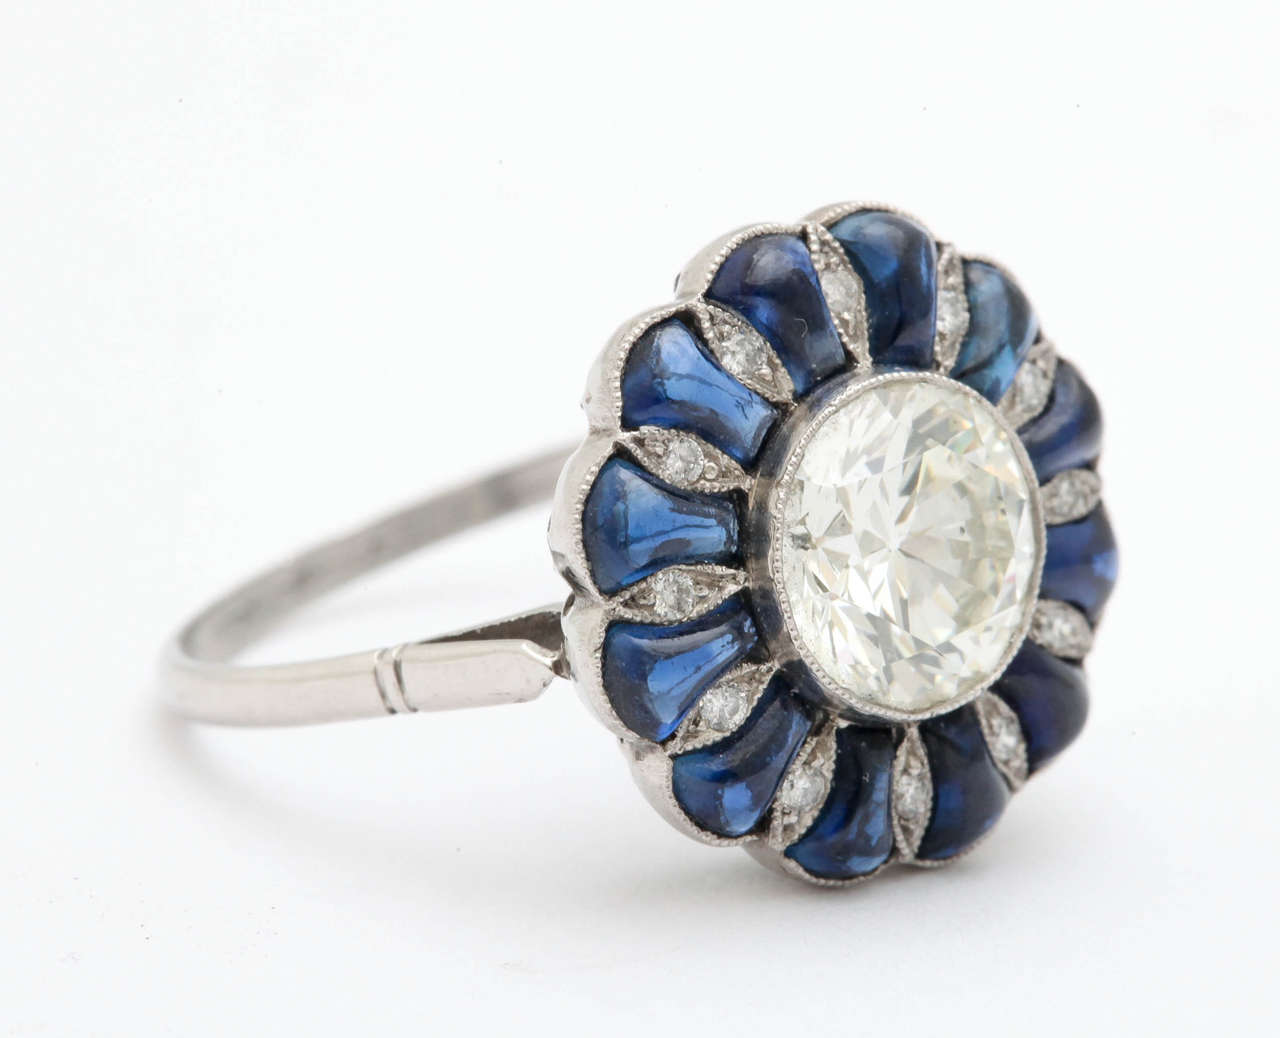 A beautiful mine cut 1.20 carat diamond surrounded by cabochon sapphires and smaller stones in a platinum setting.